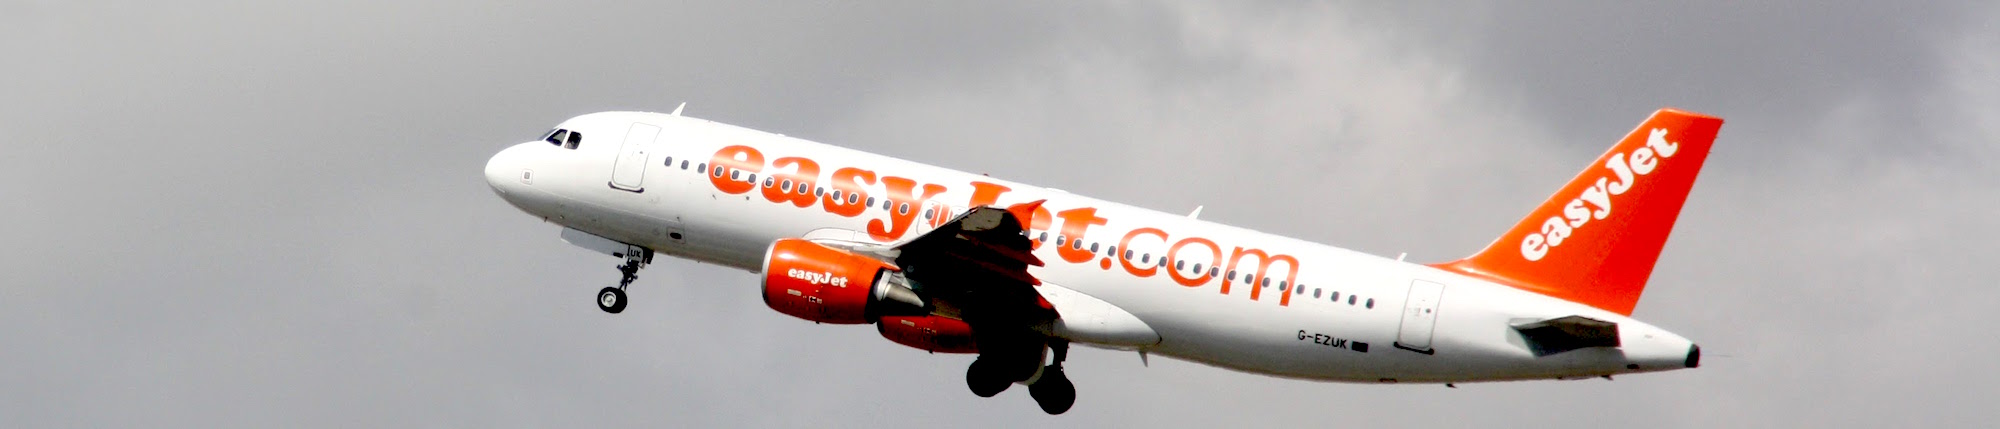 Best time to book flights for London (LTN) to Geneva (GVA) flights with EasyJet at AirHint